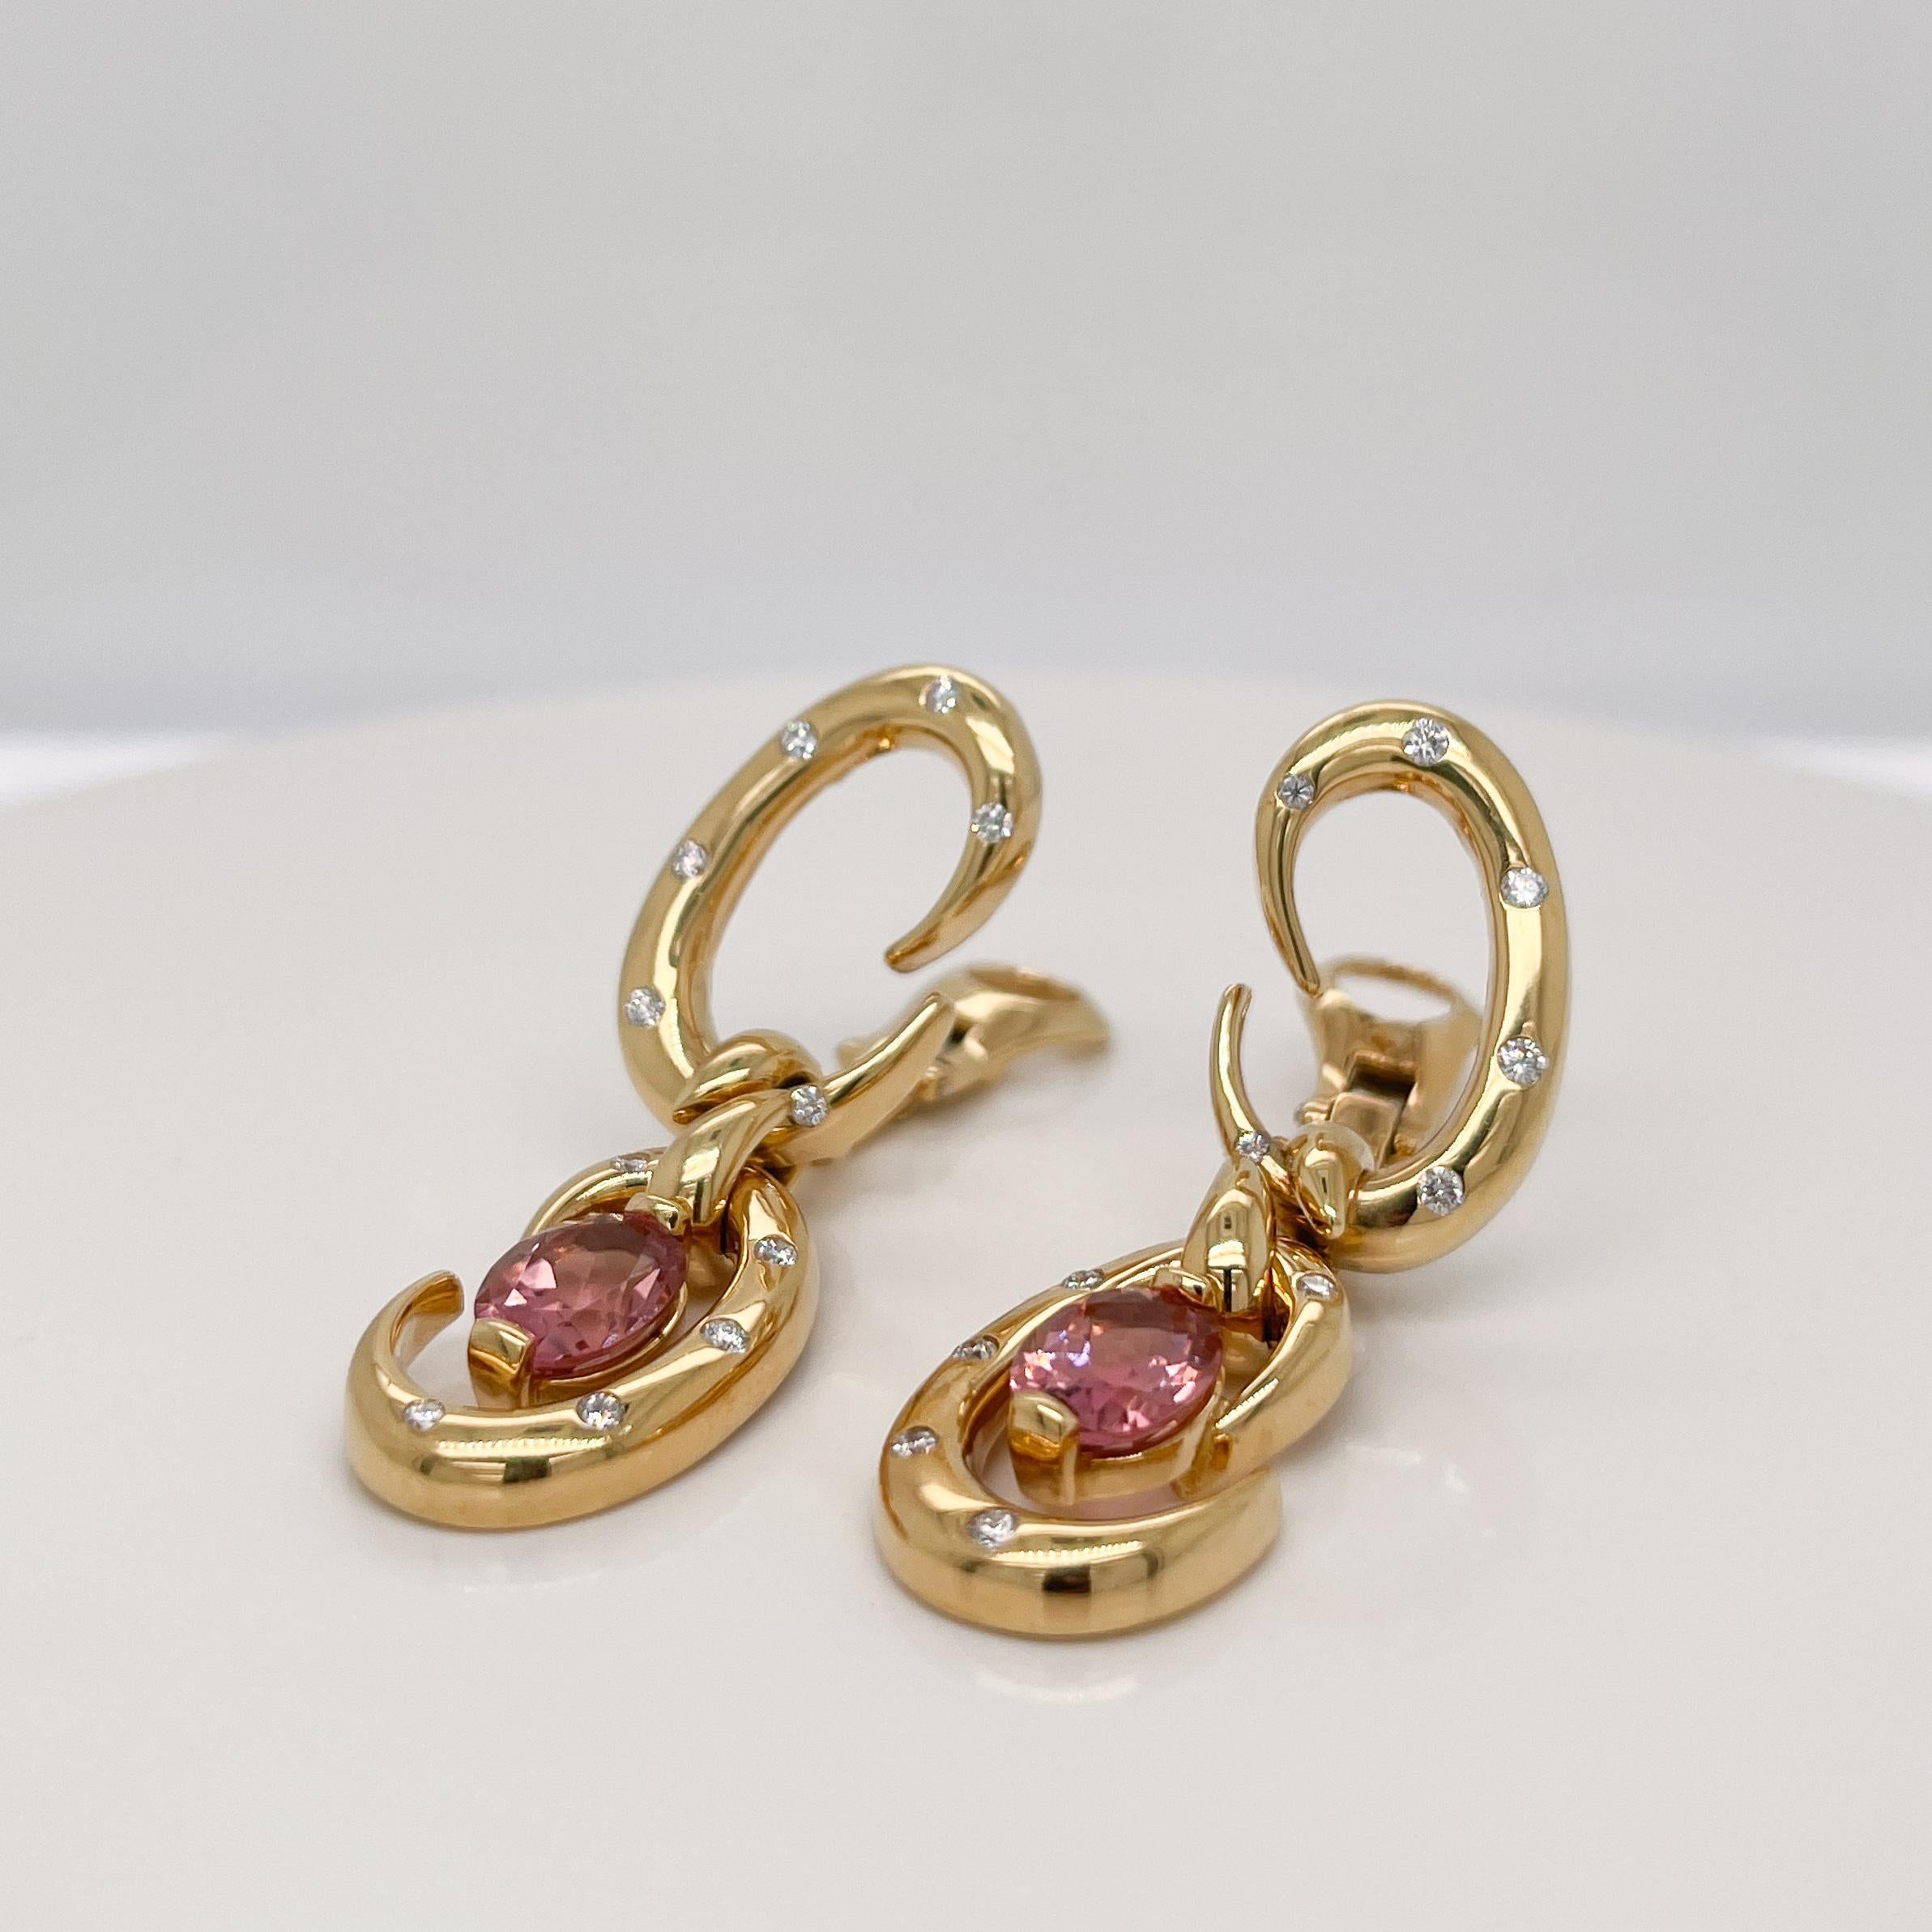 A very fine pair of stylish clip-on earrings.

By Dorfman. 

With faceted oval purple (pink) tourmaline gemstone prong set in 18k gold and with scattered, flush set  round white diamonds throughout.

A simply beautiful pair of clip earrings by